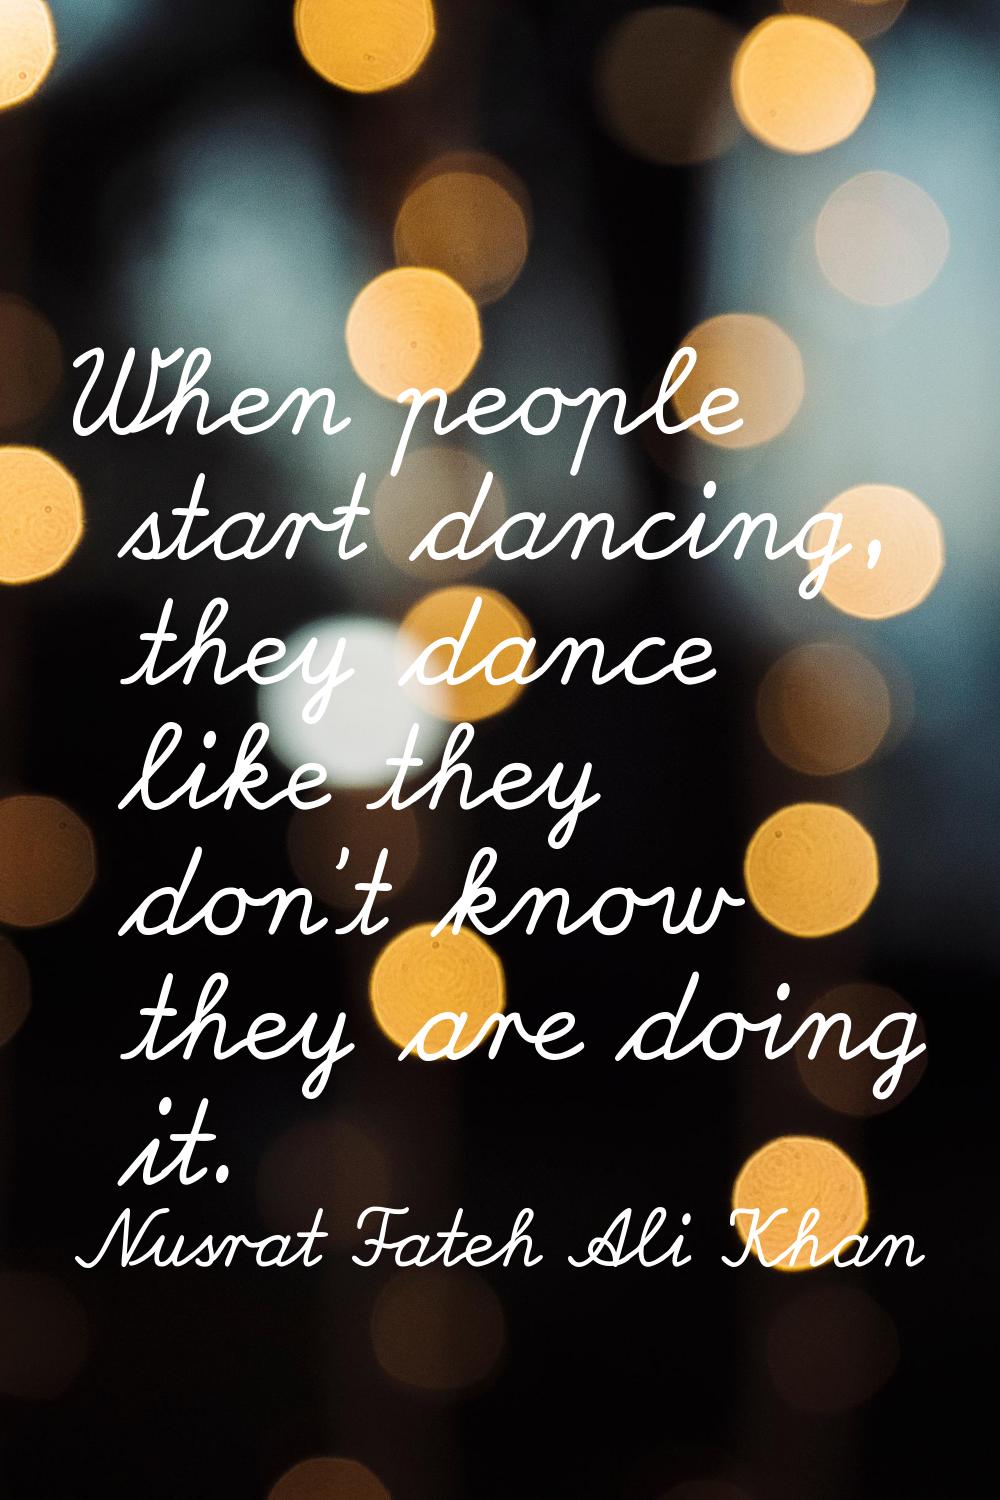 When people start dancing, they dance like they don't know they are doing it.